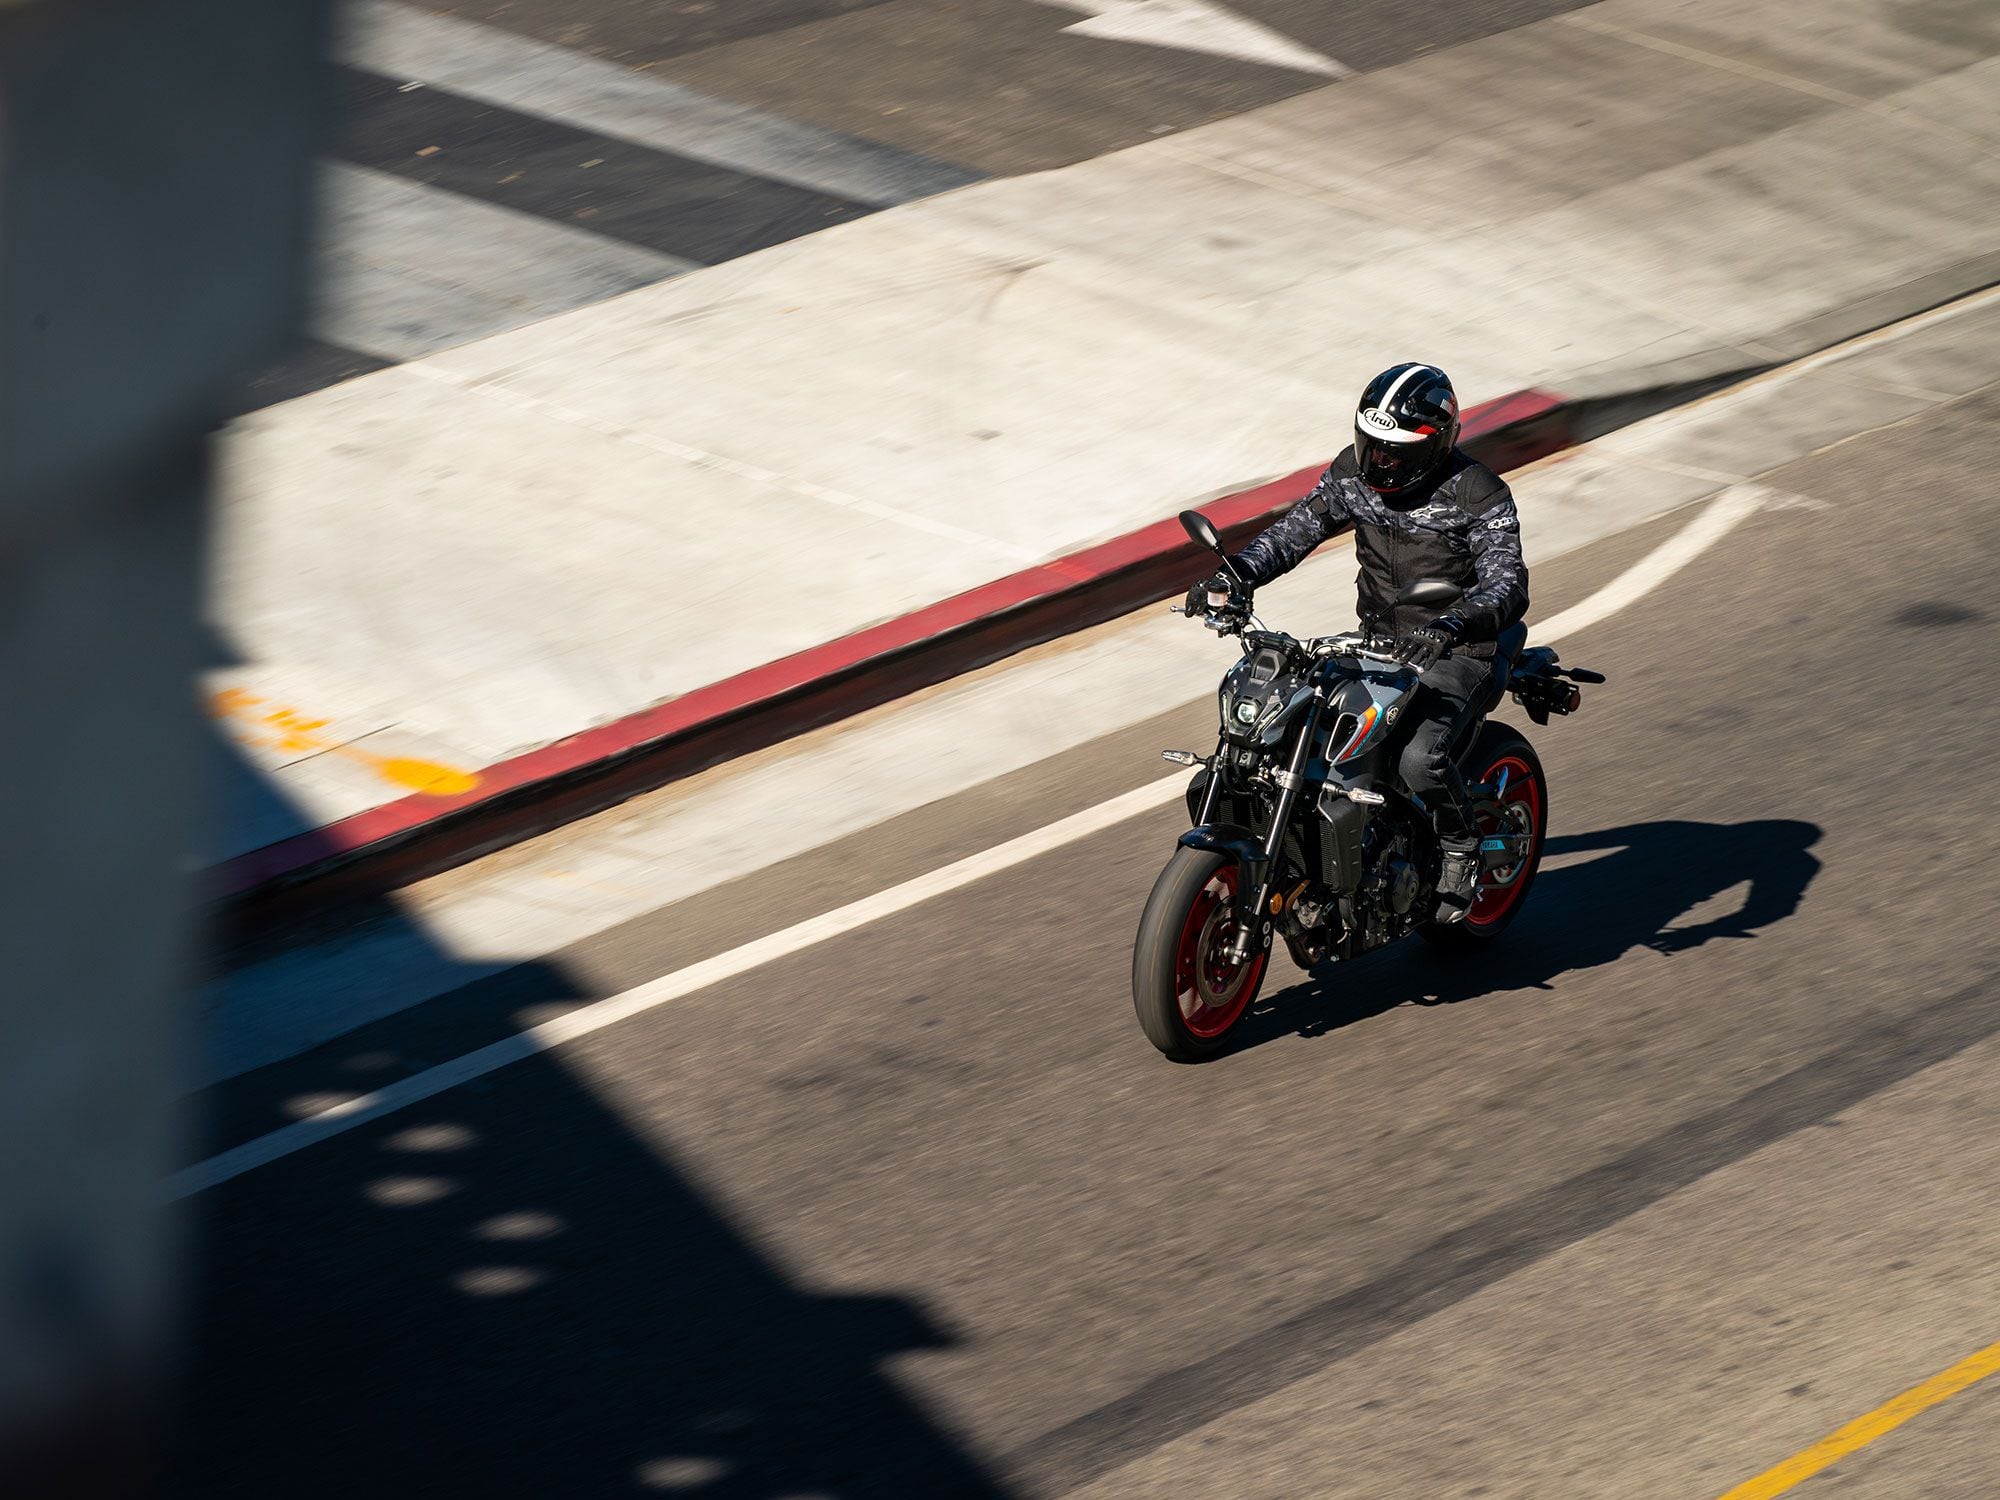 With a fully fueled curb weight of 417-pounds, the MT-09 is light and easy to ride around town.